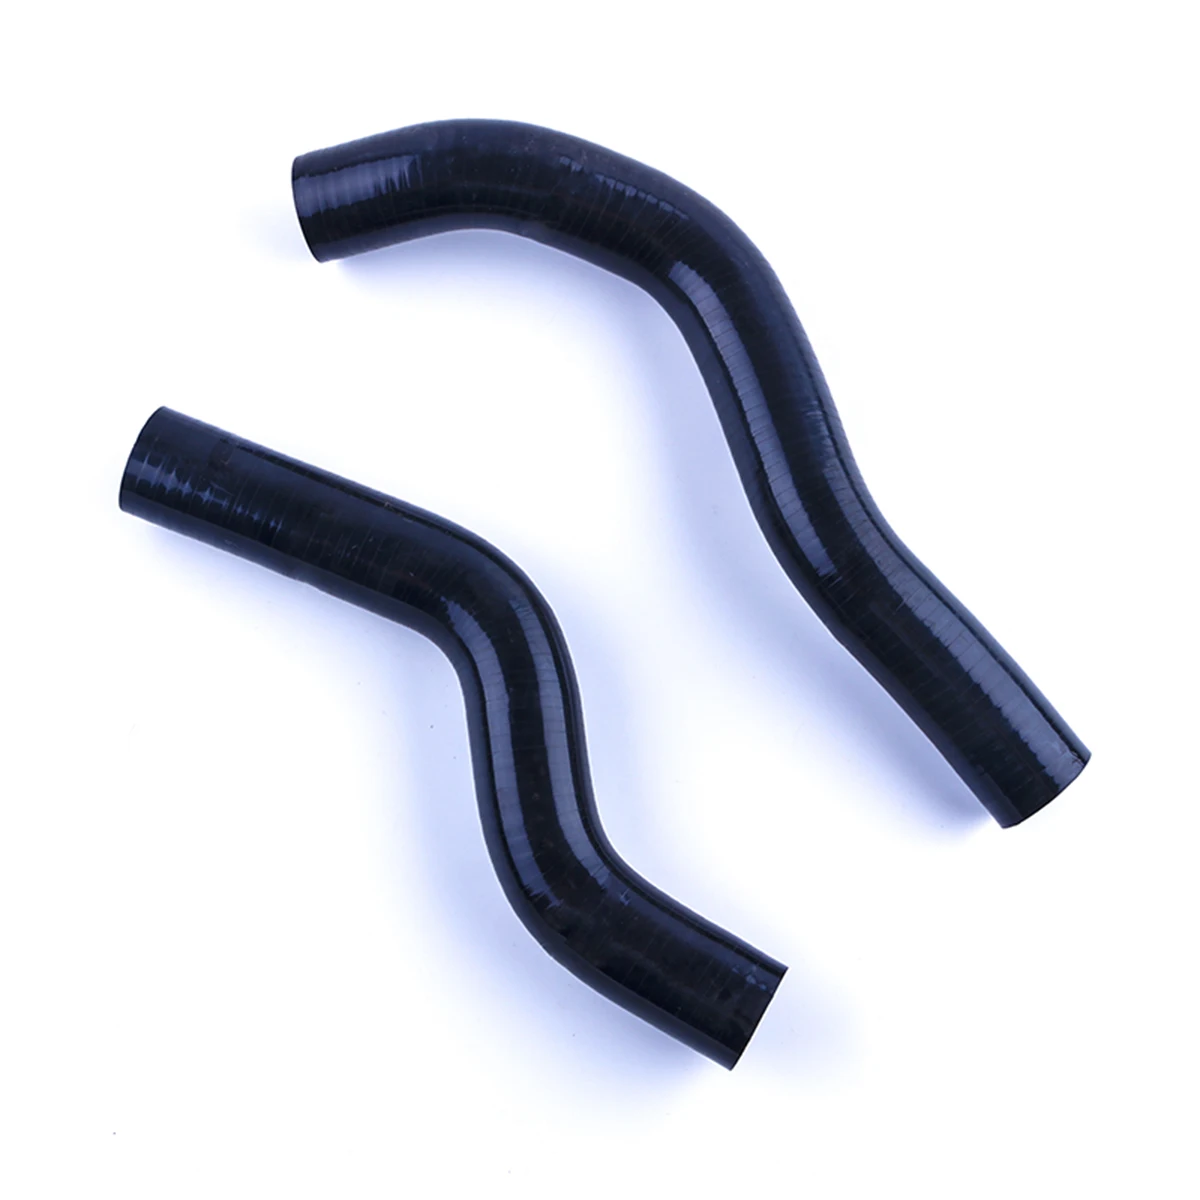 

New Silicone Radiator Coolant Cooling Hose Pipe Piping Tube Tubing Duct Kit for Honda Honda Fit Jazz Ge8 Rs Ge9 L15A7 2008-2012